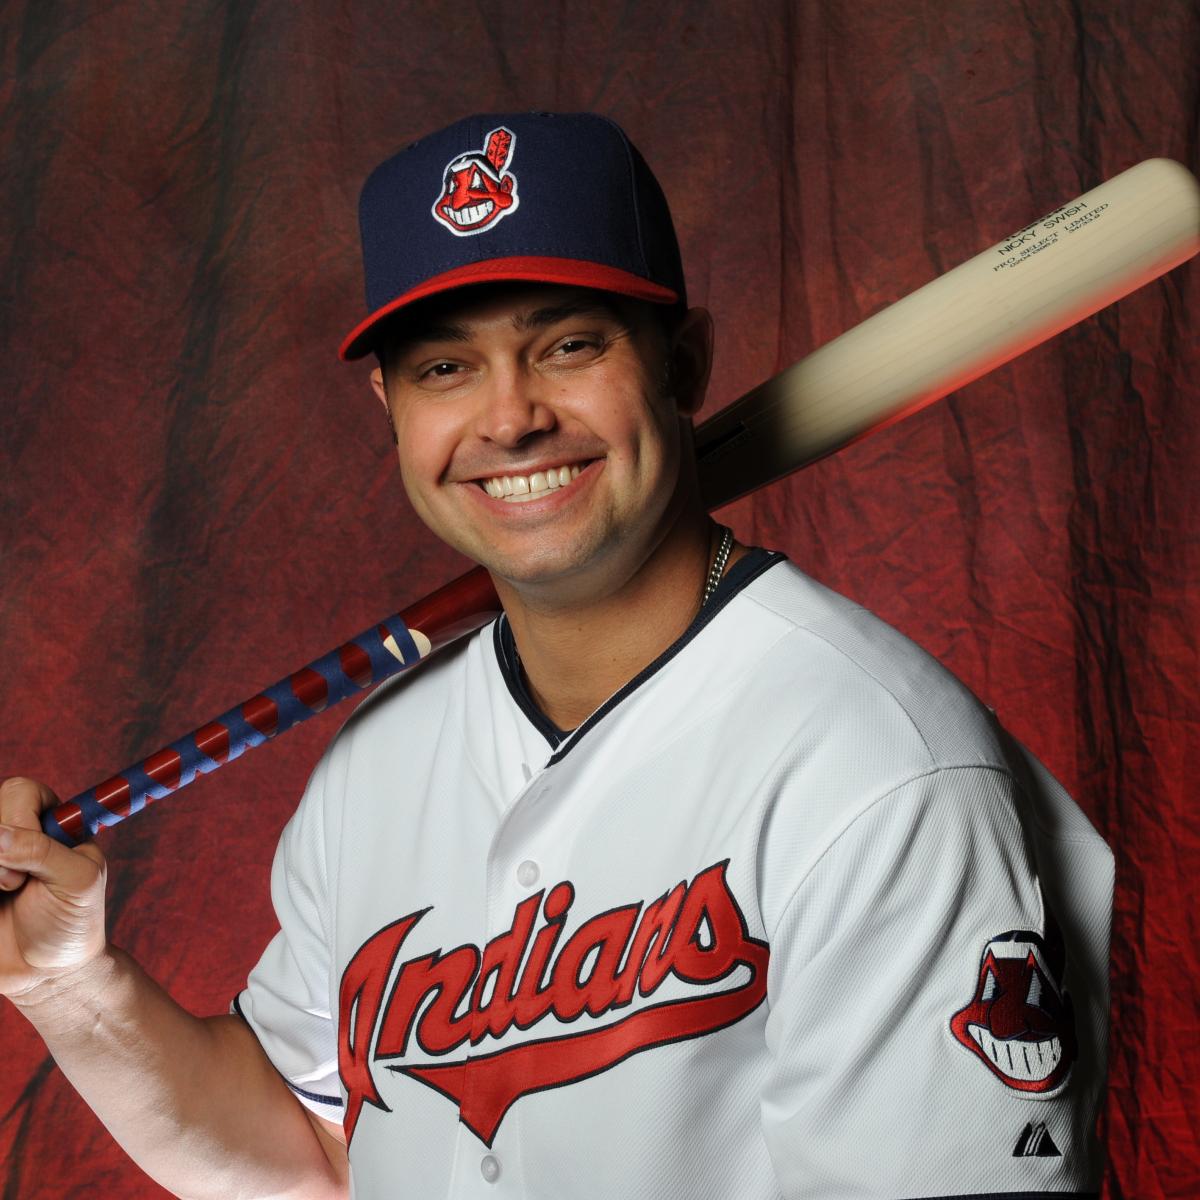 Remembering Nick Swisher's Wild Ride with the New York Yankees